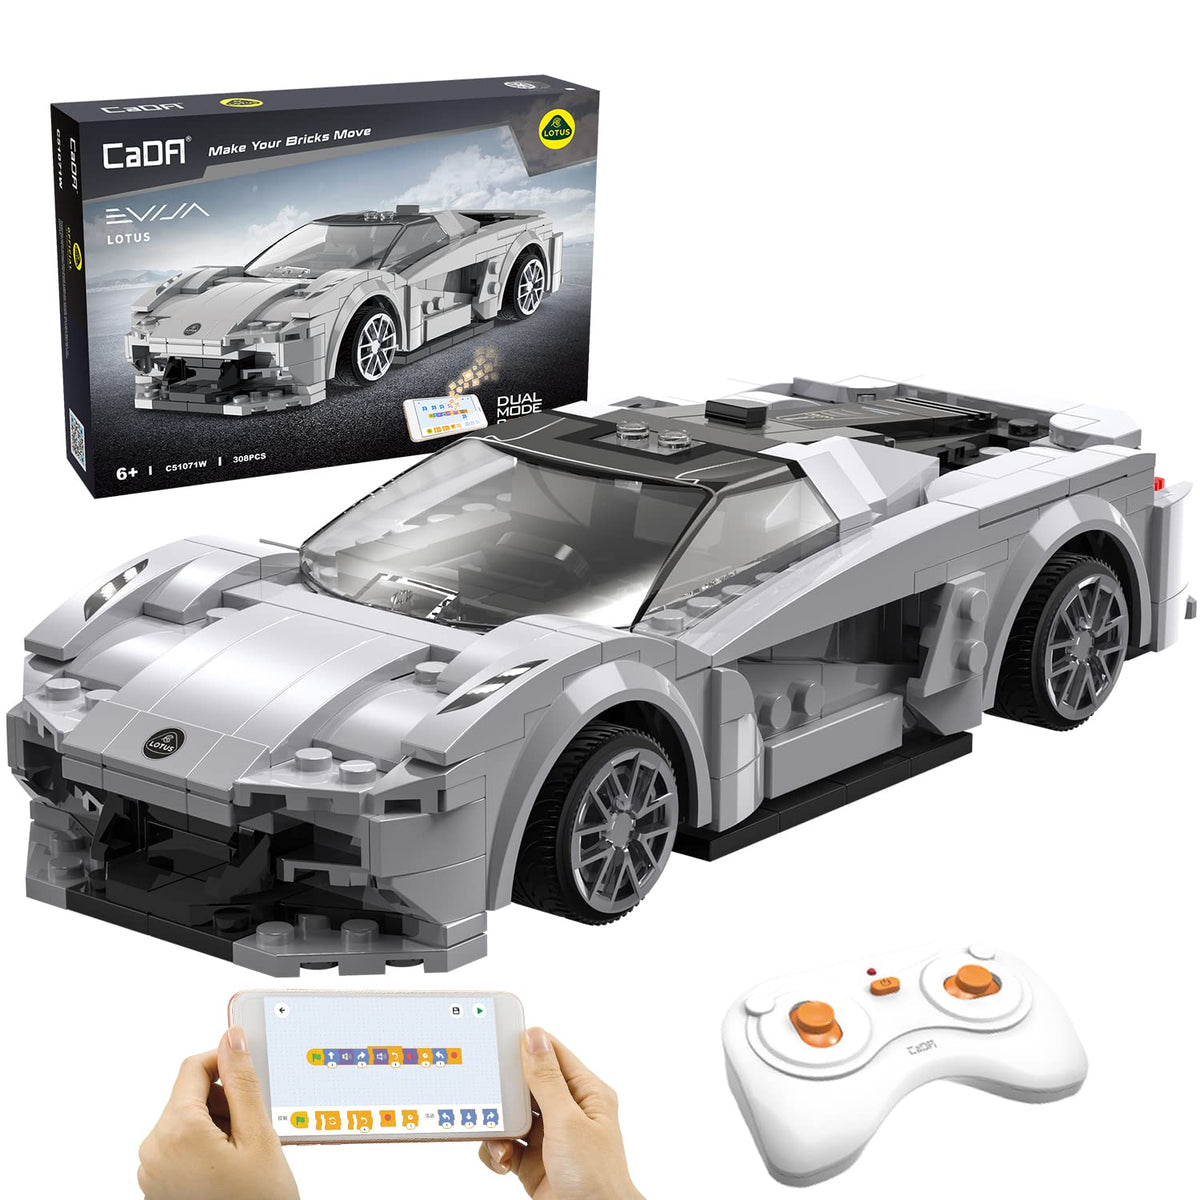 CaDA Remote Control Car Lotus Evija, 308 Pcs RC Cars Building Toys, Model Car Kits Building Blocks, STEM Toys for Boys with Programmable APP, Birthday Gifts for Kids 6 7 8 9 10+ Years Old